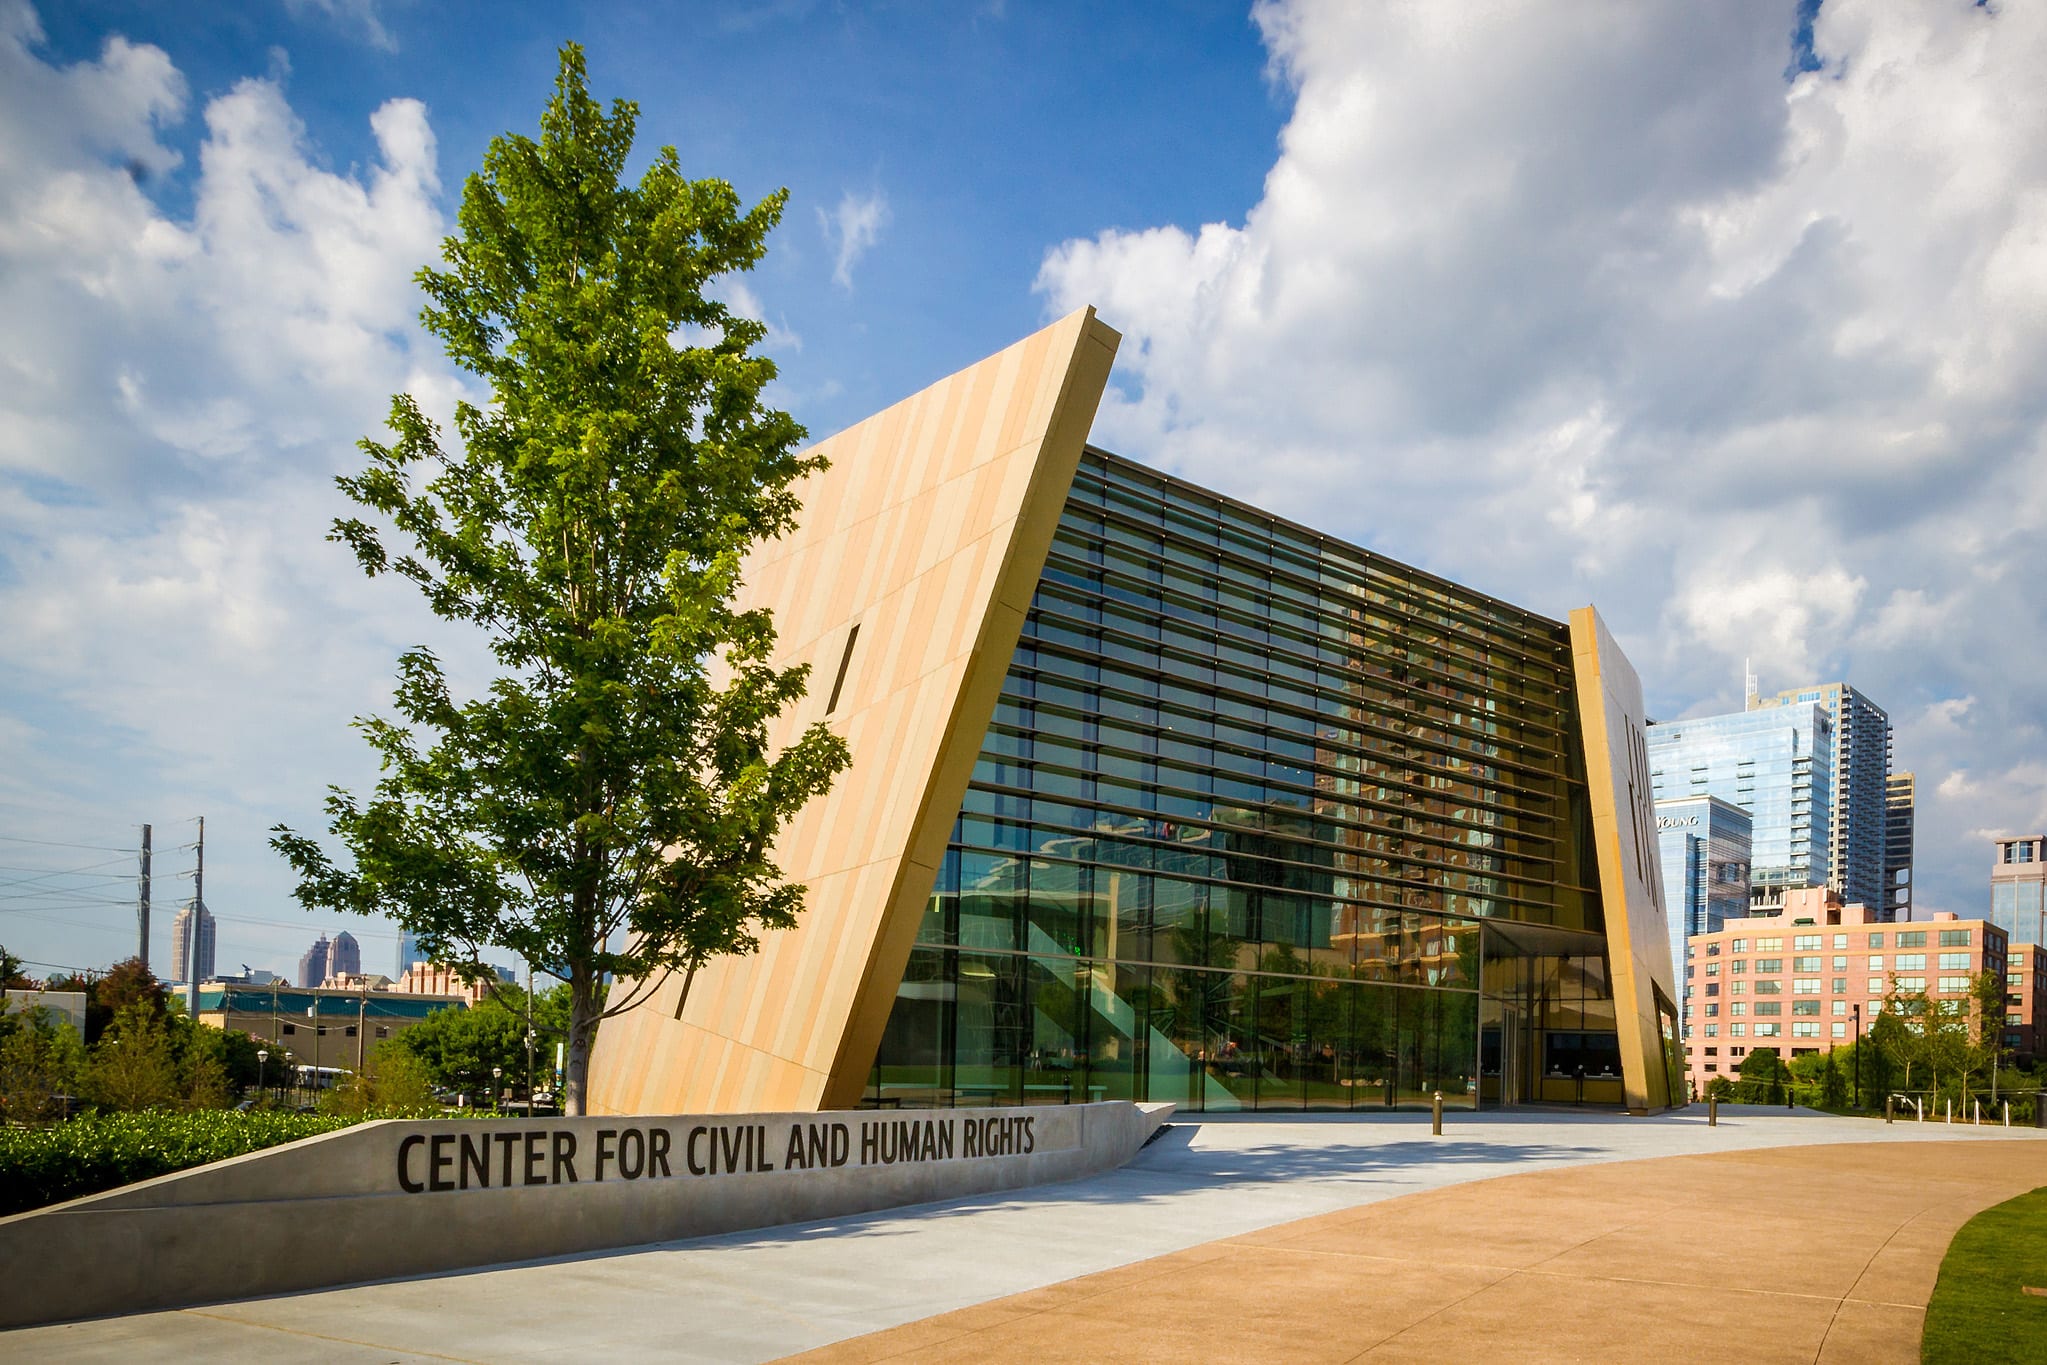 The National Center for Civil and Human Rights is one of the top places to visit in Atlanta